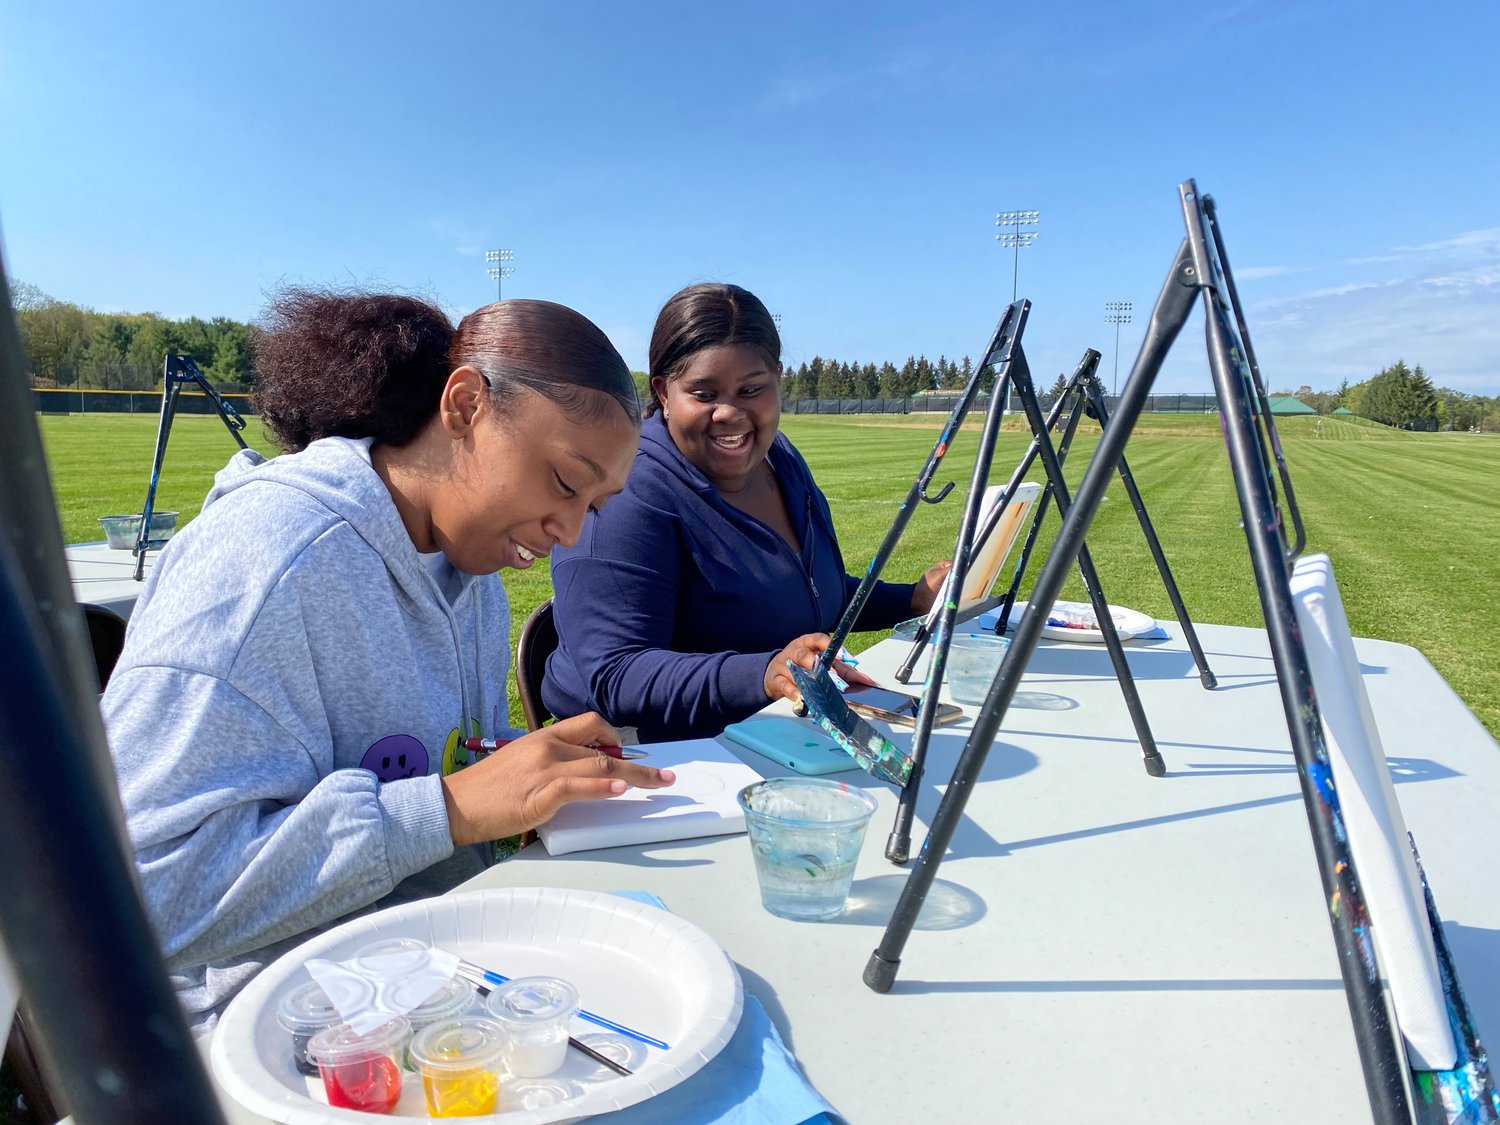 Easels on the Gogh will offer fall-themed painting at Herkimer College’s Fall Fest and Alumni Weekend.